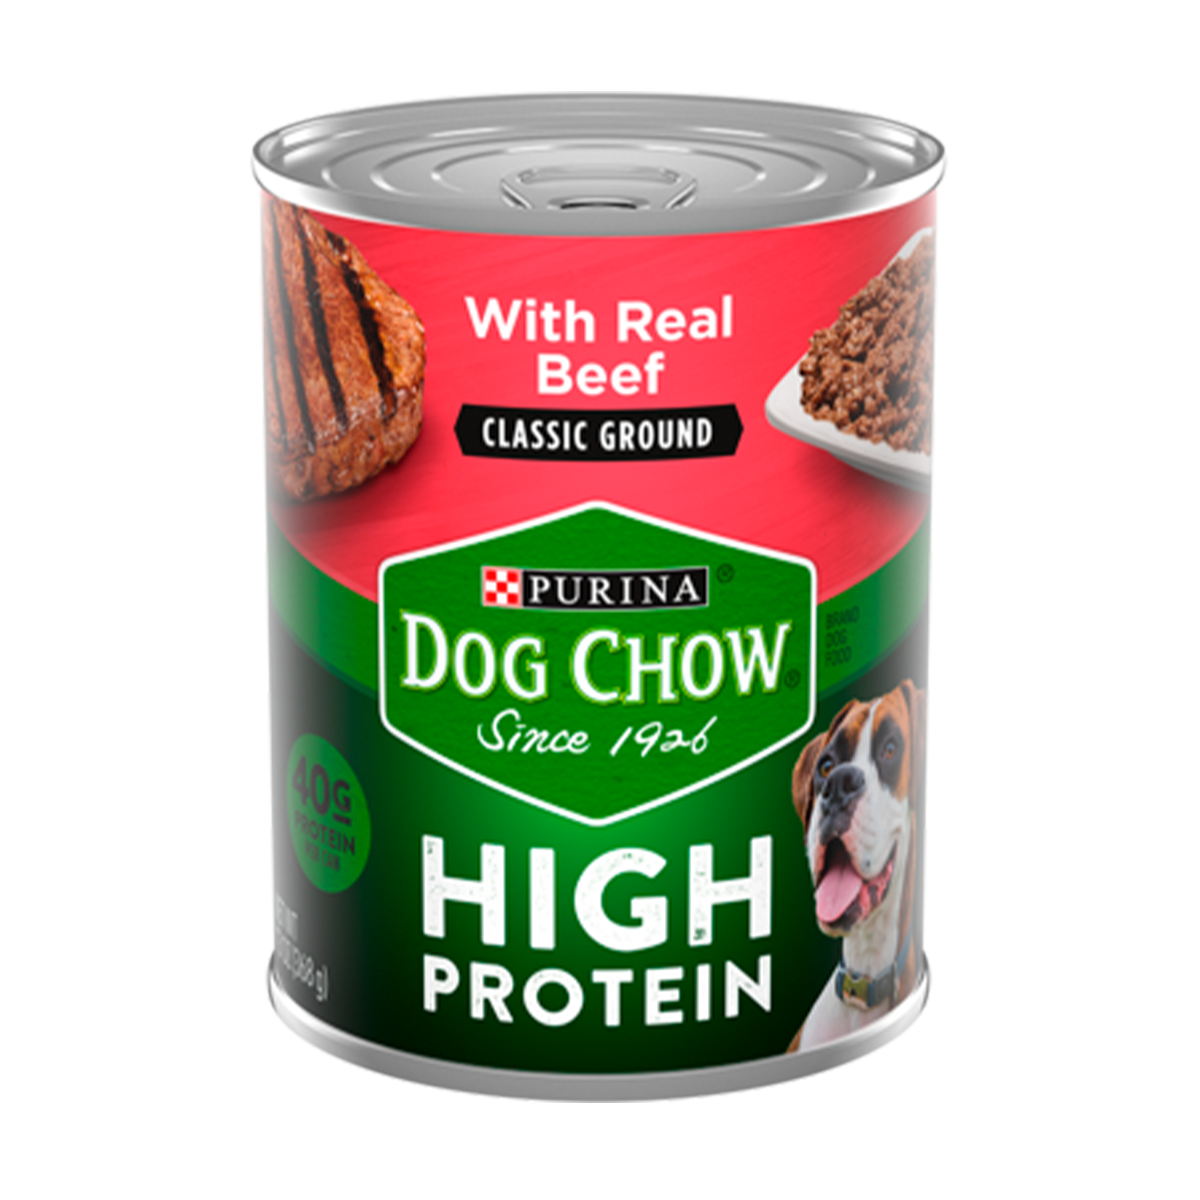 purina-dog-chow--high-protein-beef-classic-ground.png